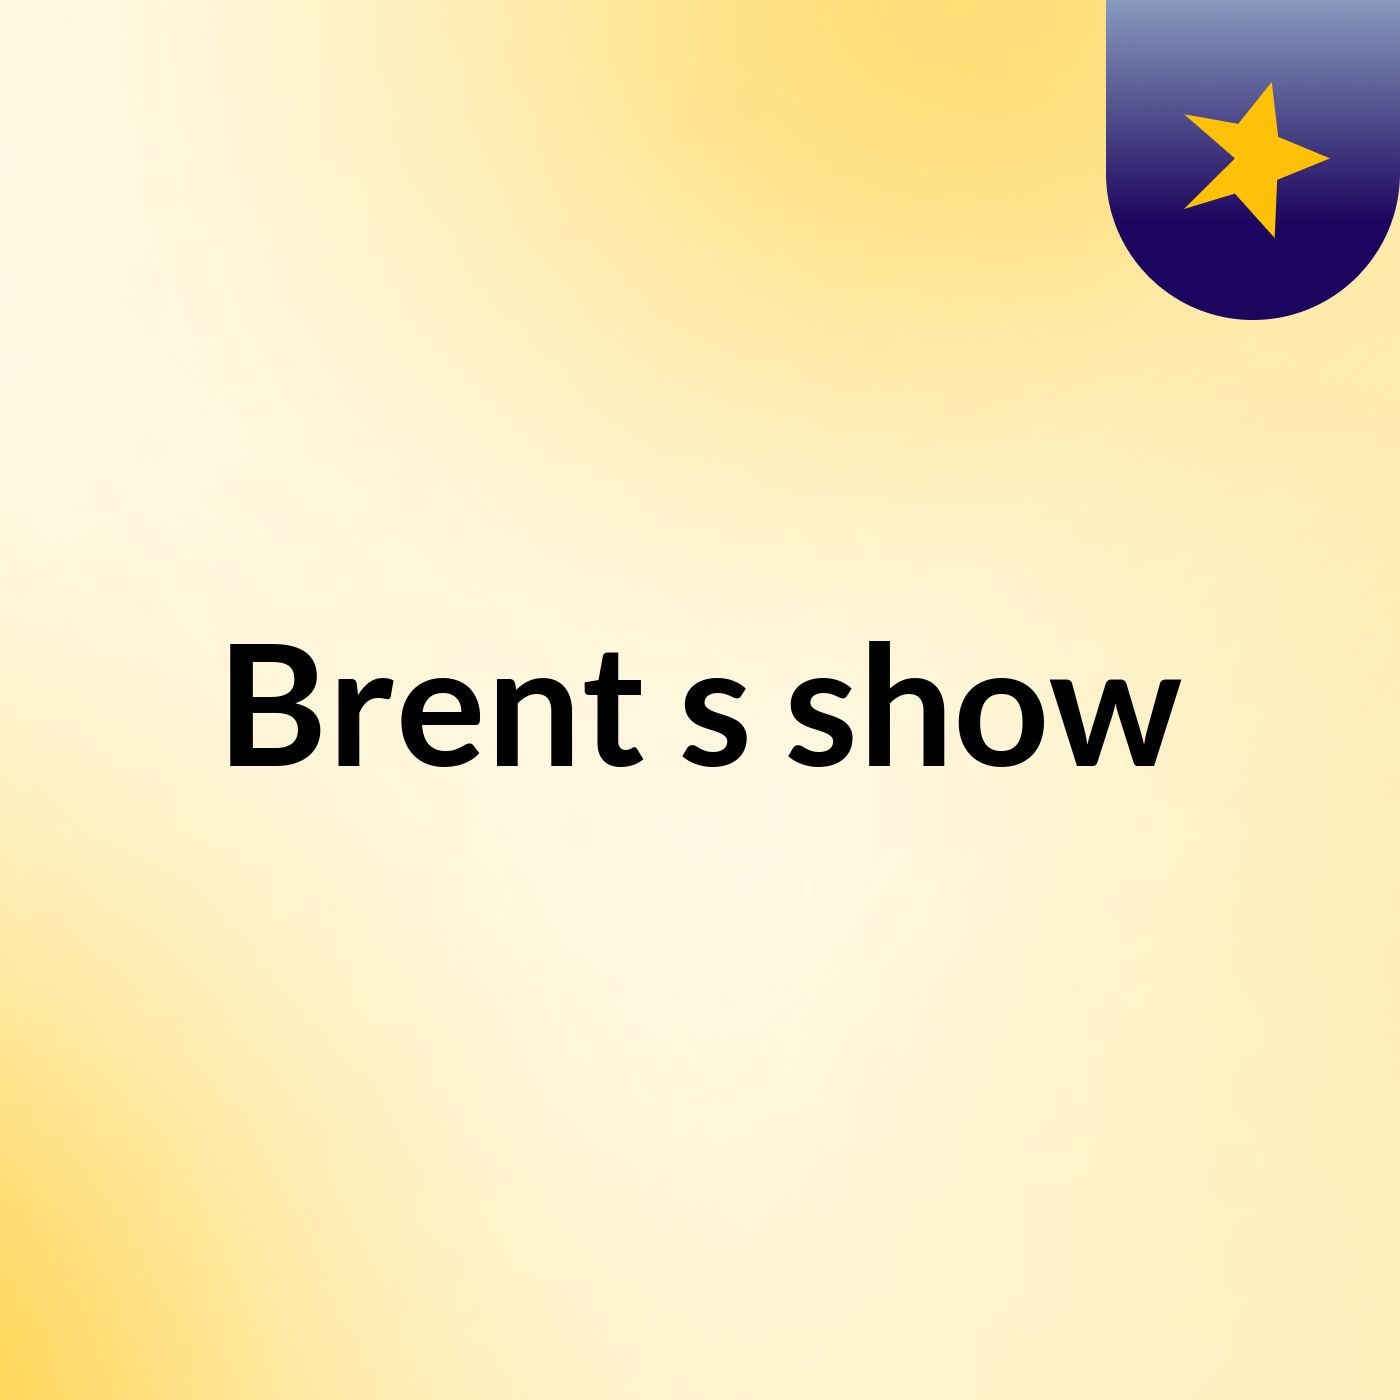 Brent's show